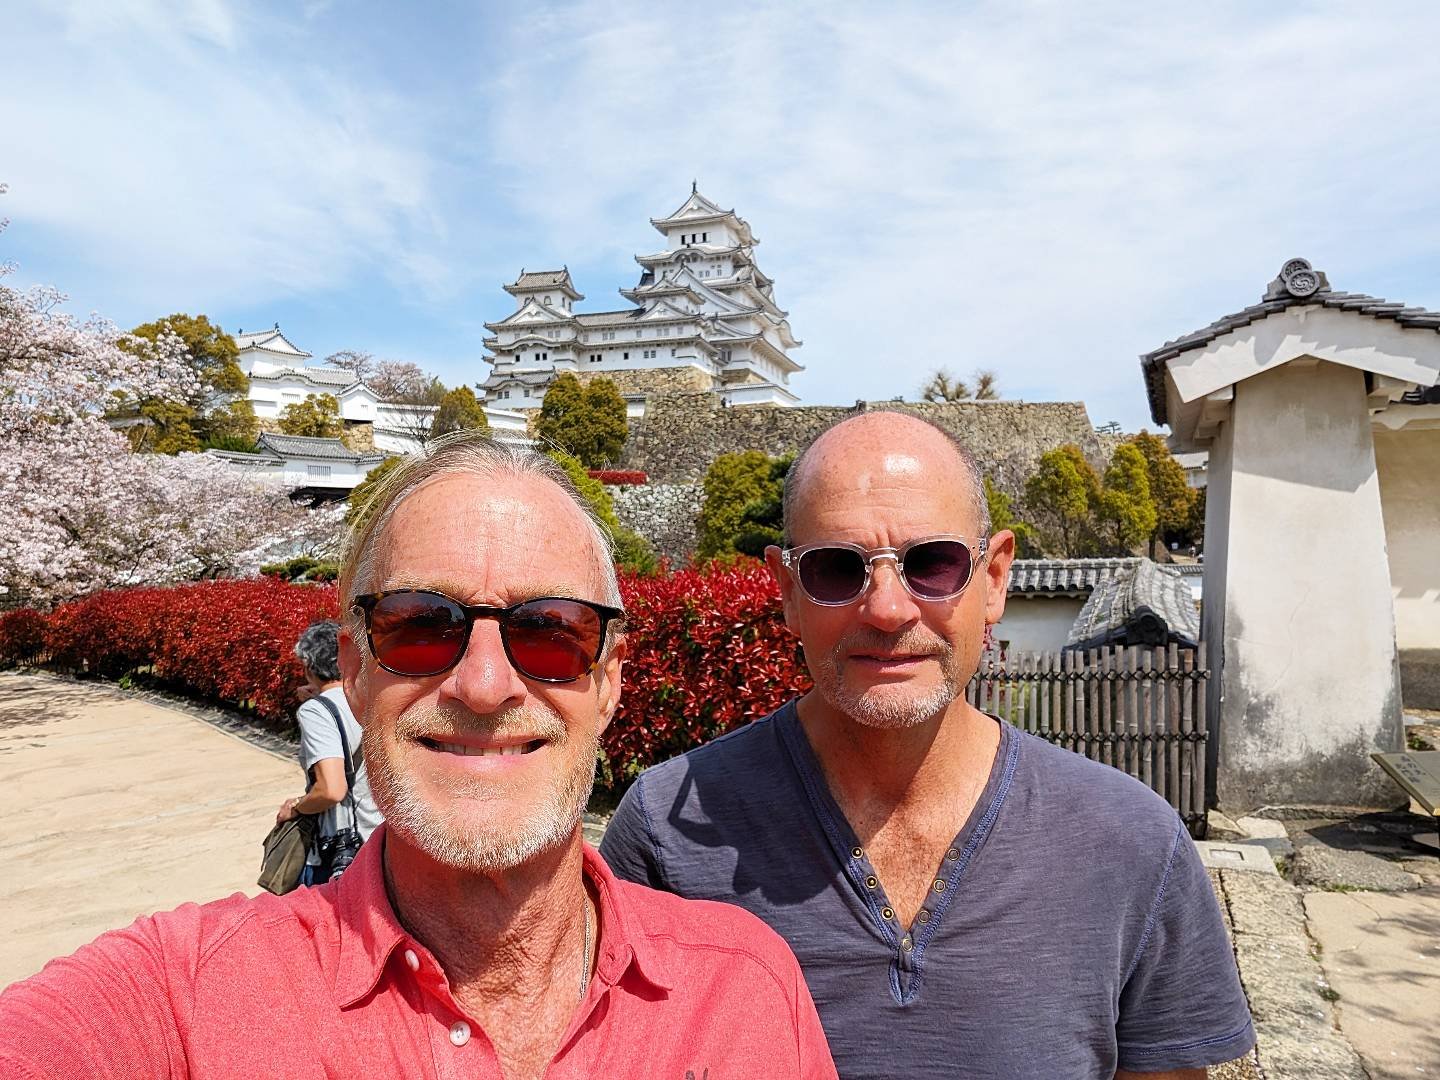 Our Japanese friend Aki added Himeji to our list to stop and see the castle.🙏🏽🩷 It was the perfect half way point between our hotel transfer from the islands to Kobe! And the excellent Japanese train system made it oh so convenient! 🇯🇵🗾🩷
👨🏻&